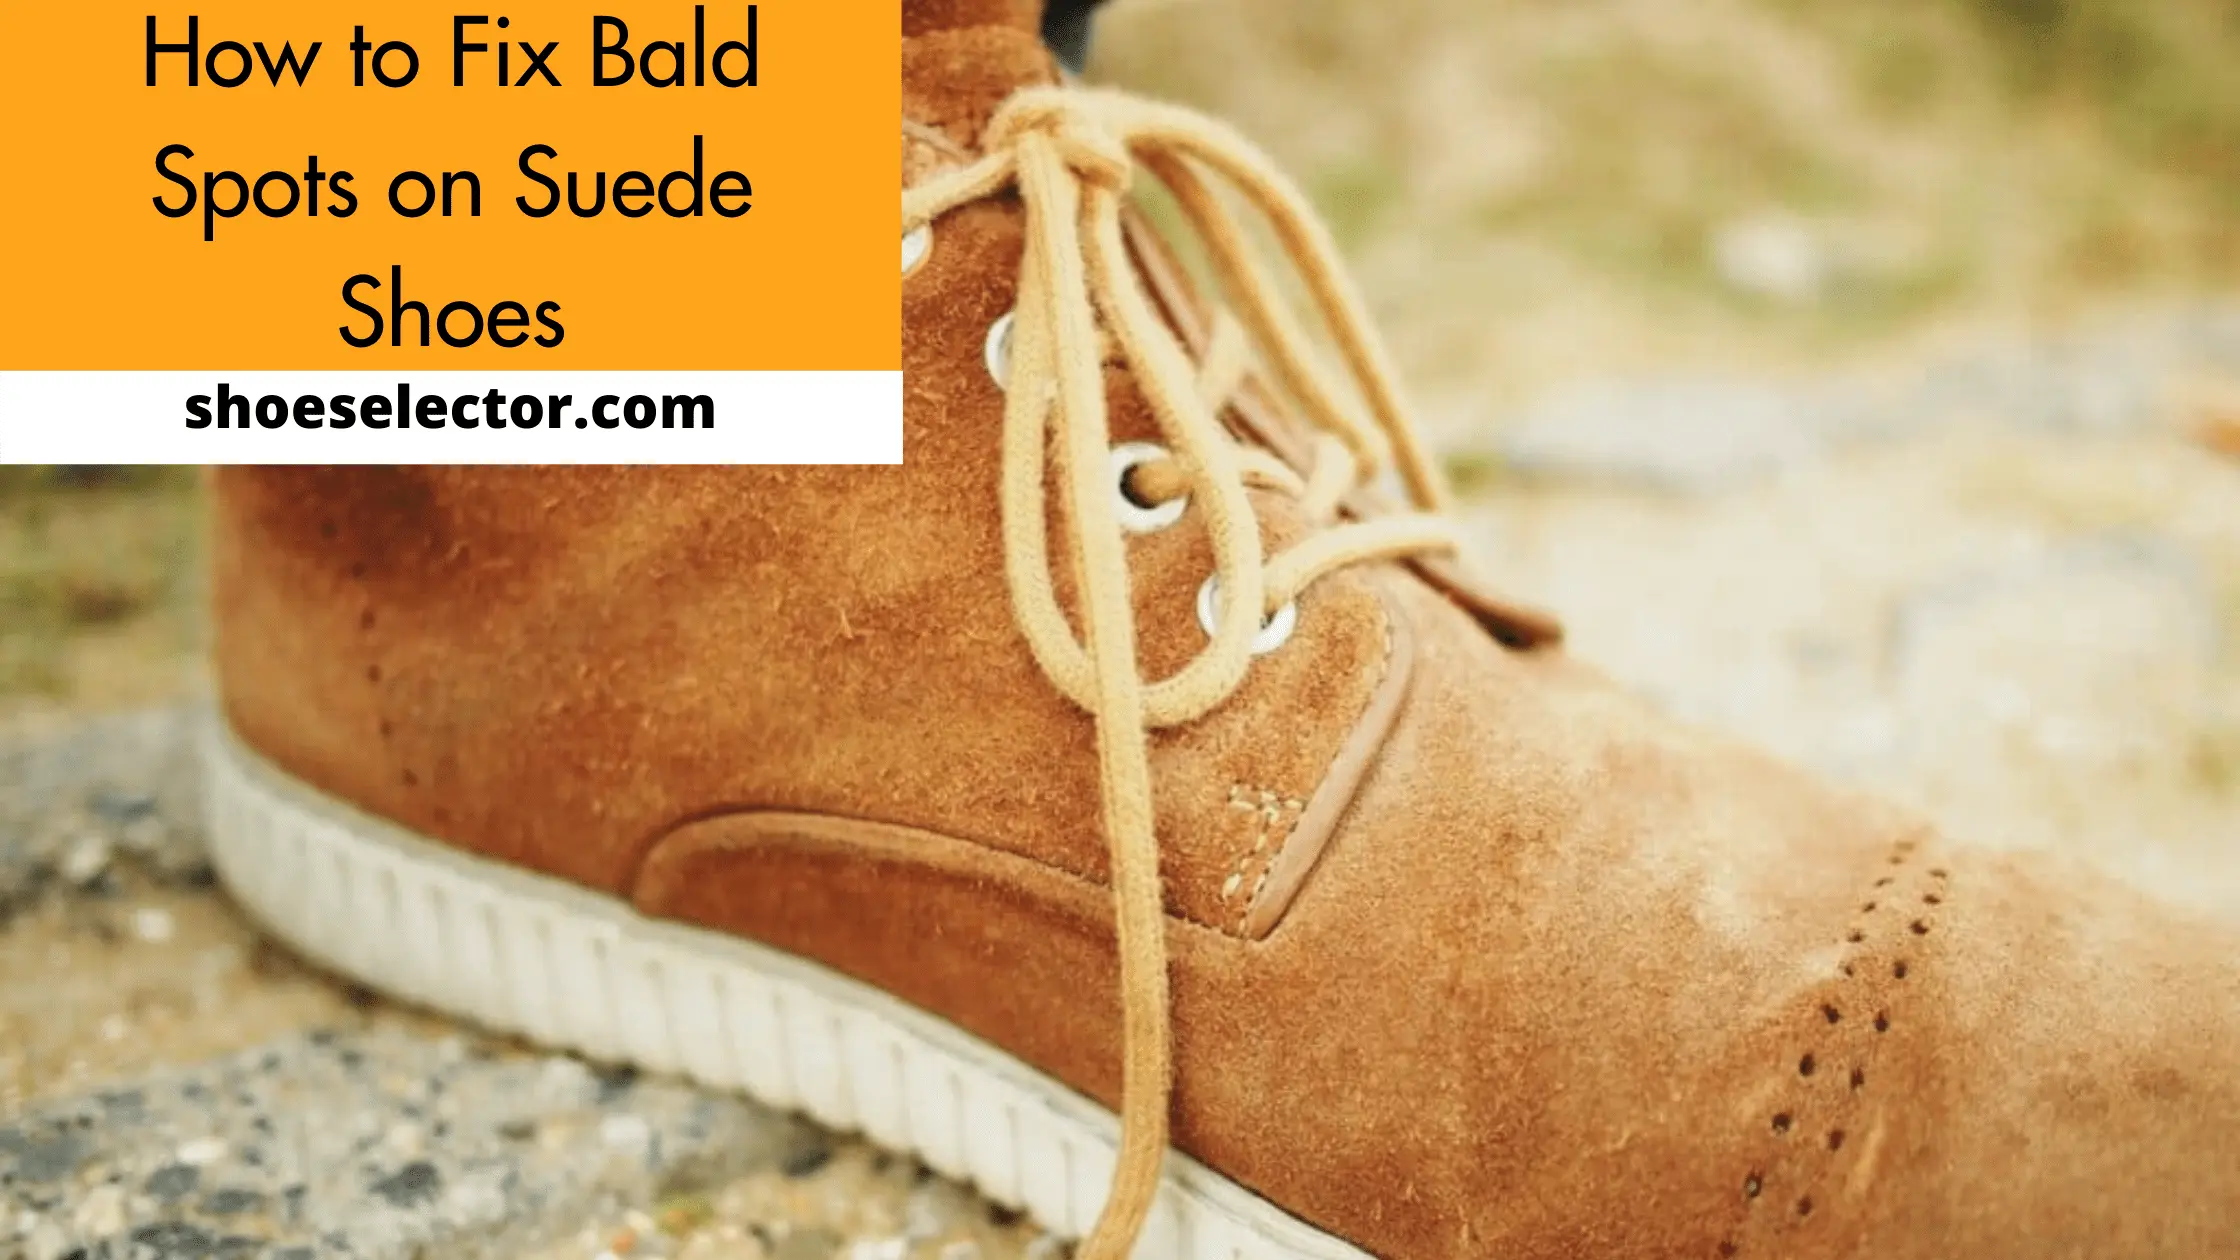 How to Fix Bald Spots on Suede Shoes ? Simple Guide To Follow